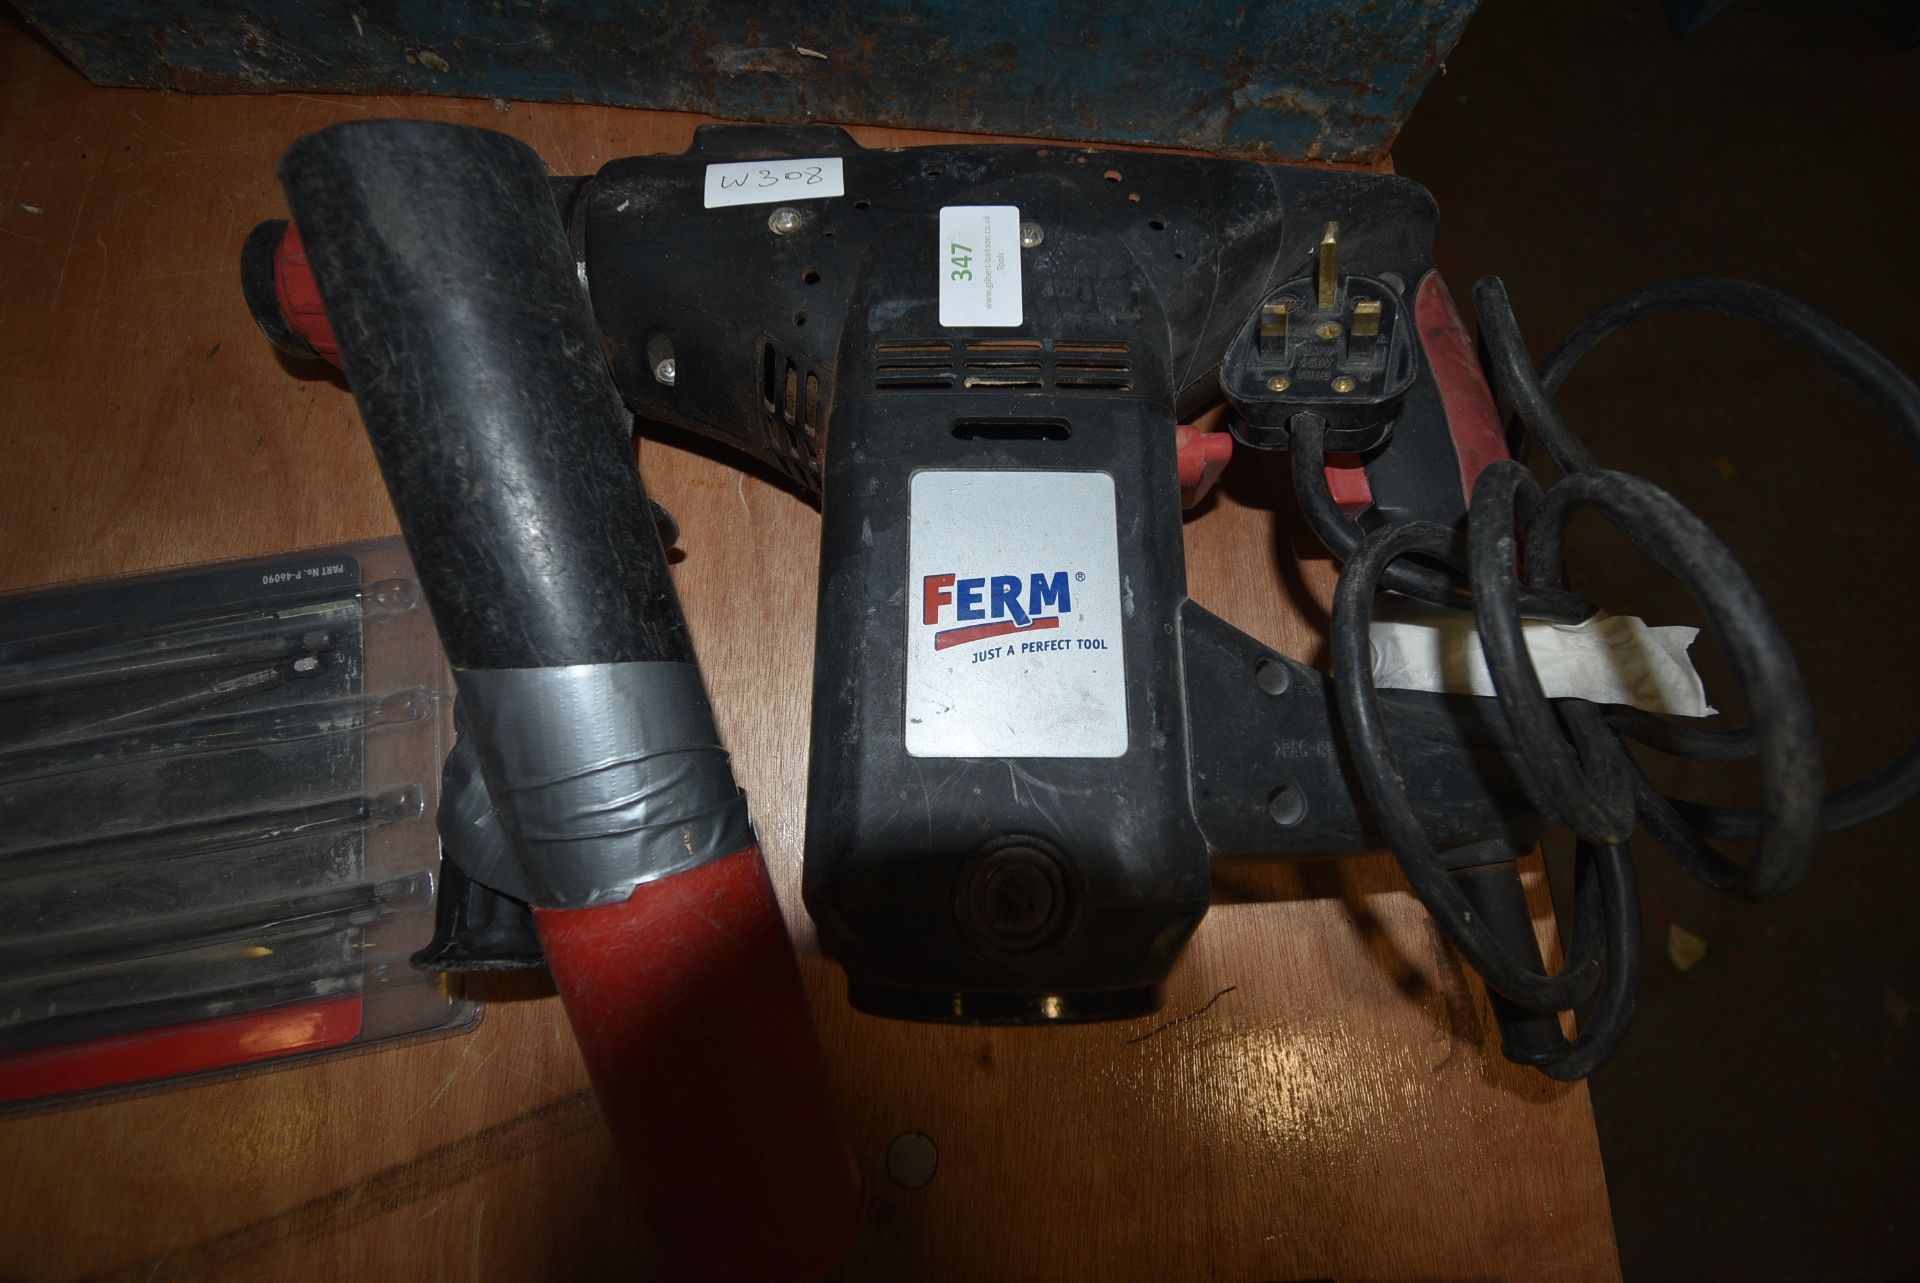 Ferm FBH-1100 Hammer Drill - Image 2 of 2